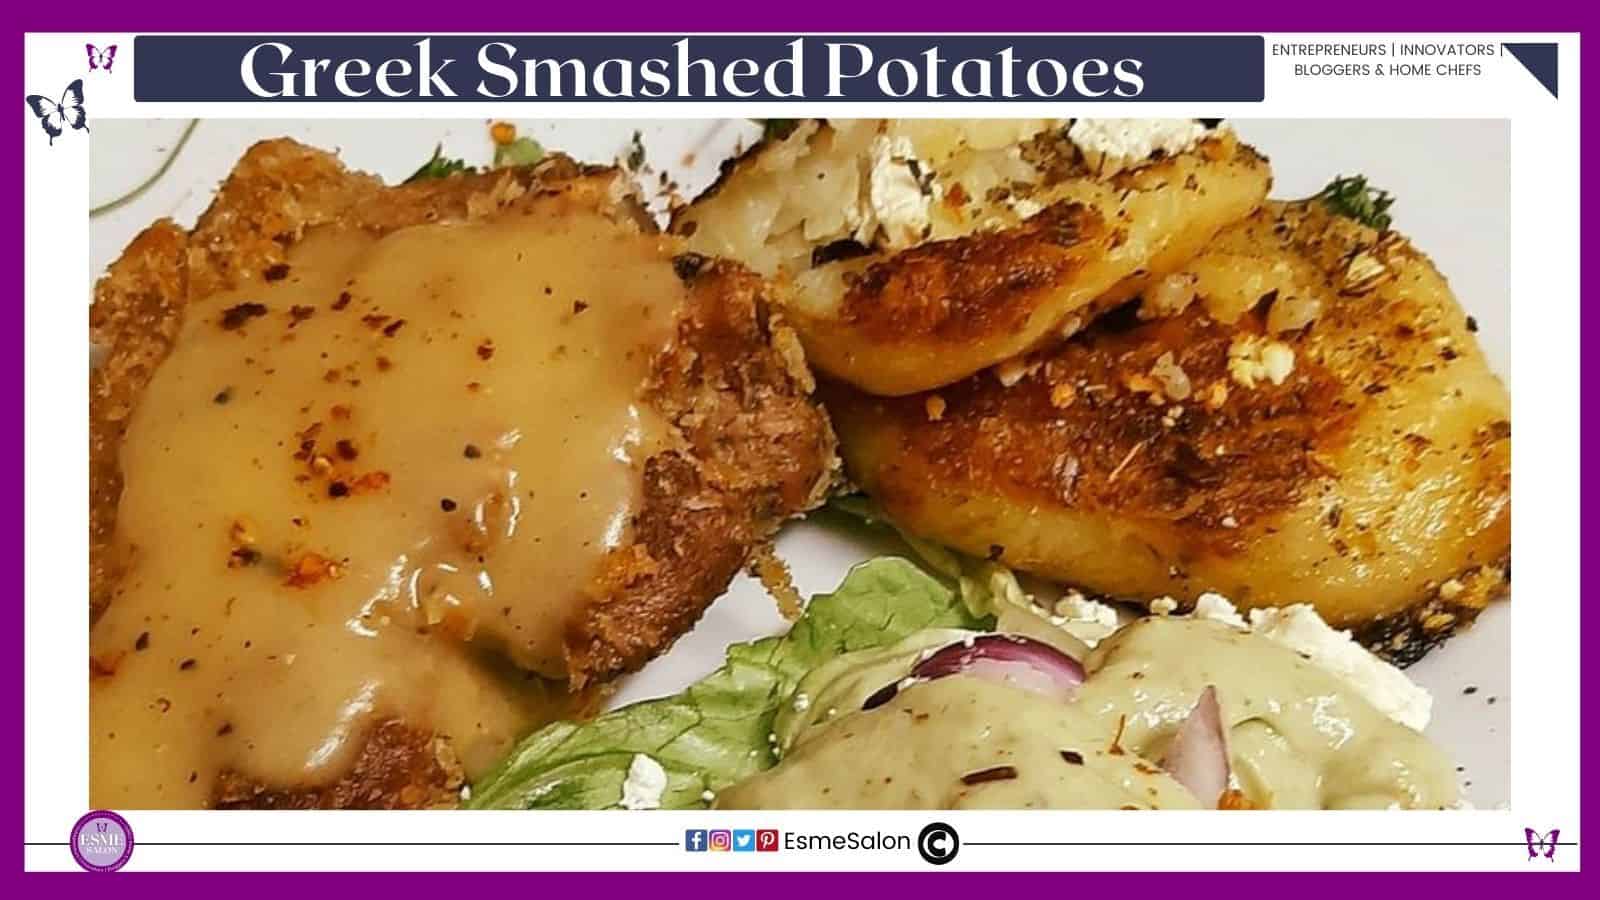 an image of an image of Greek Smashed Potatoes with pork chops, and a side of salad